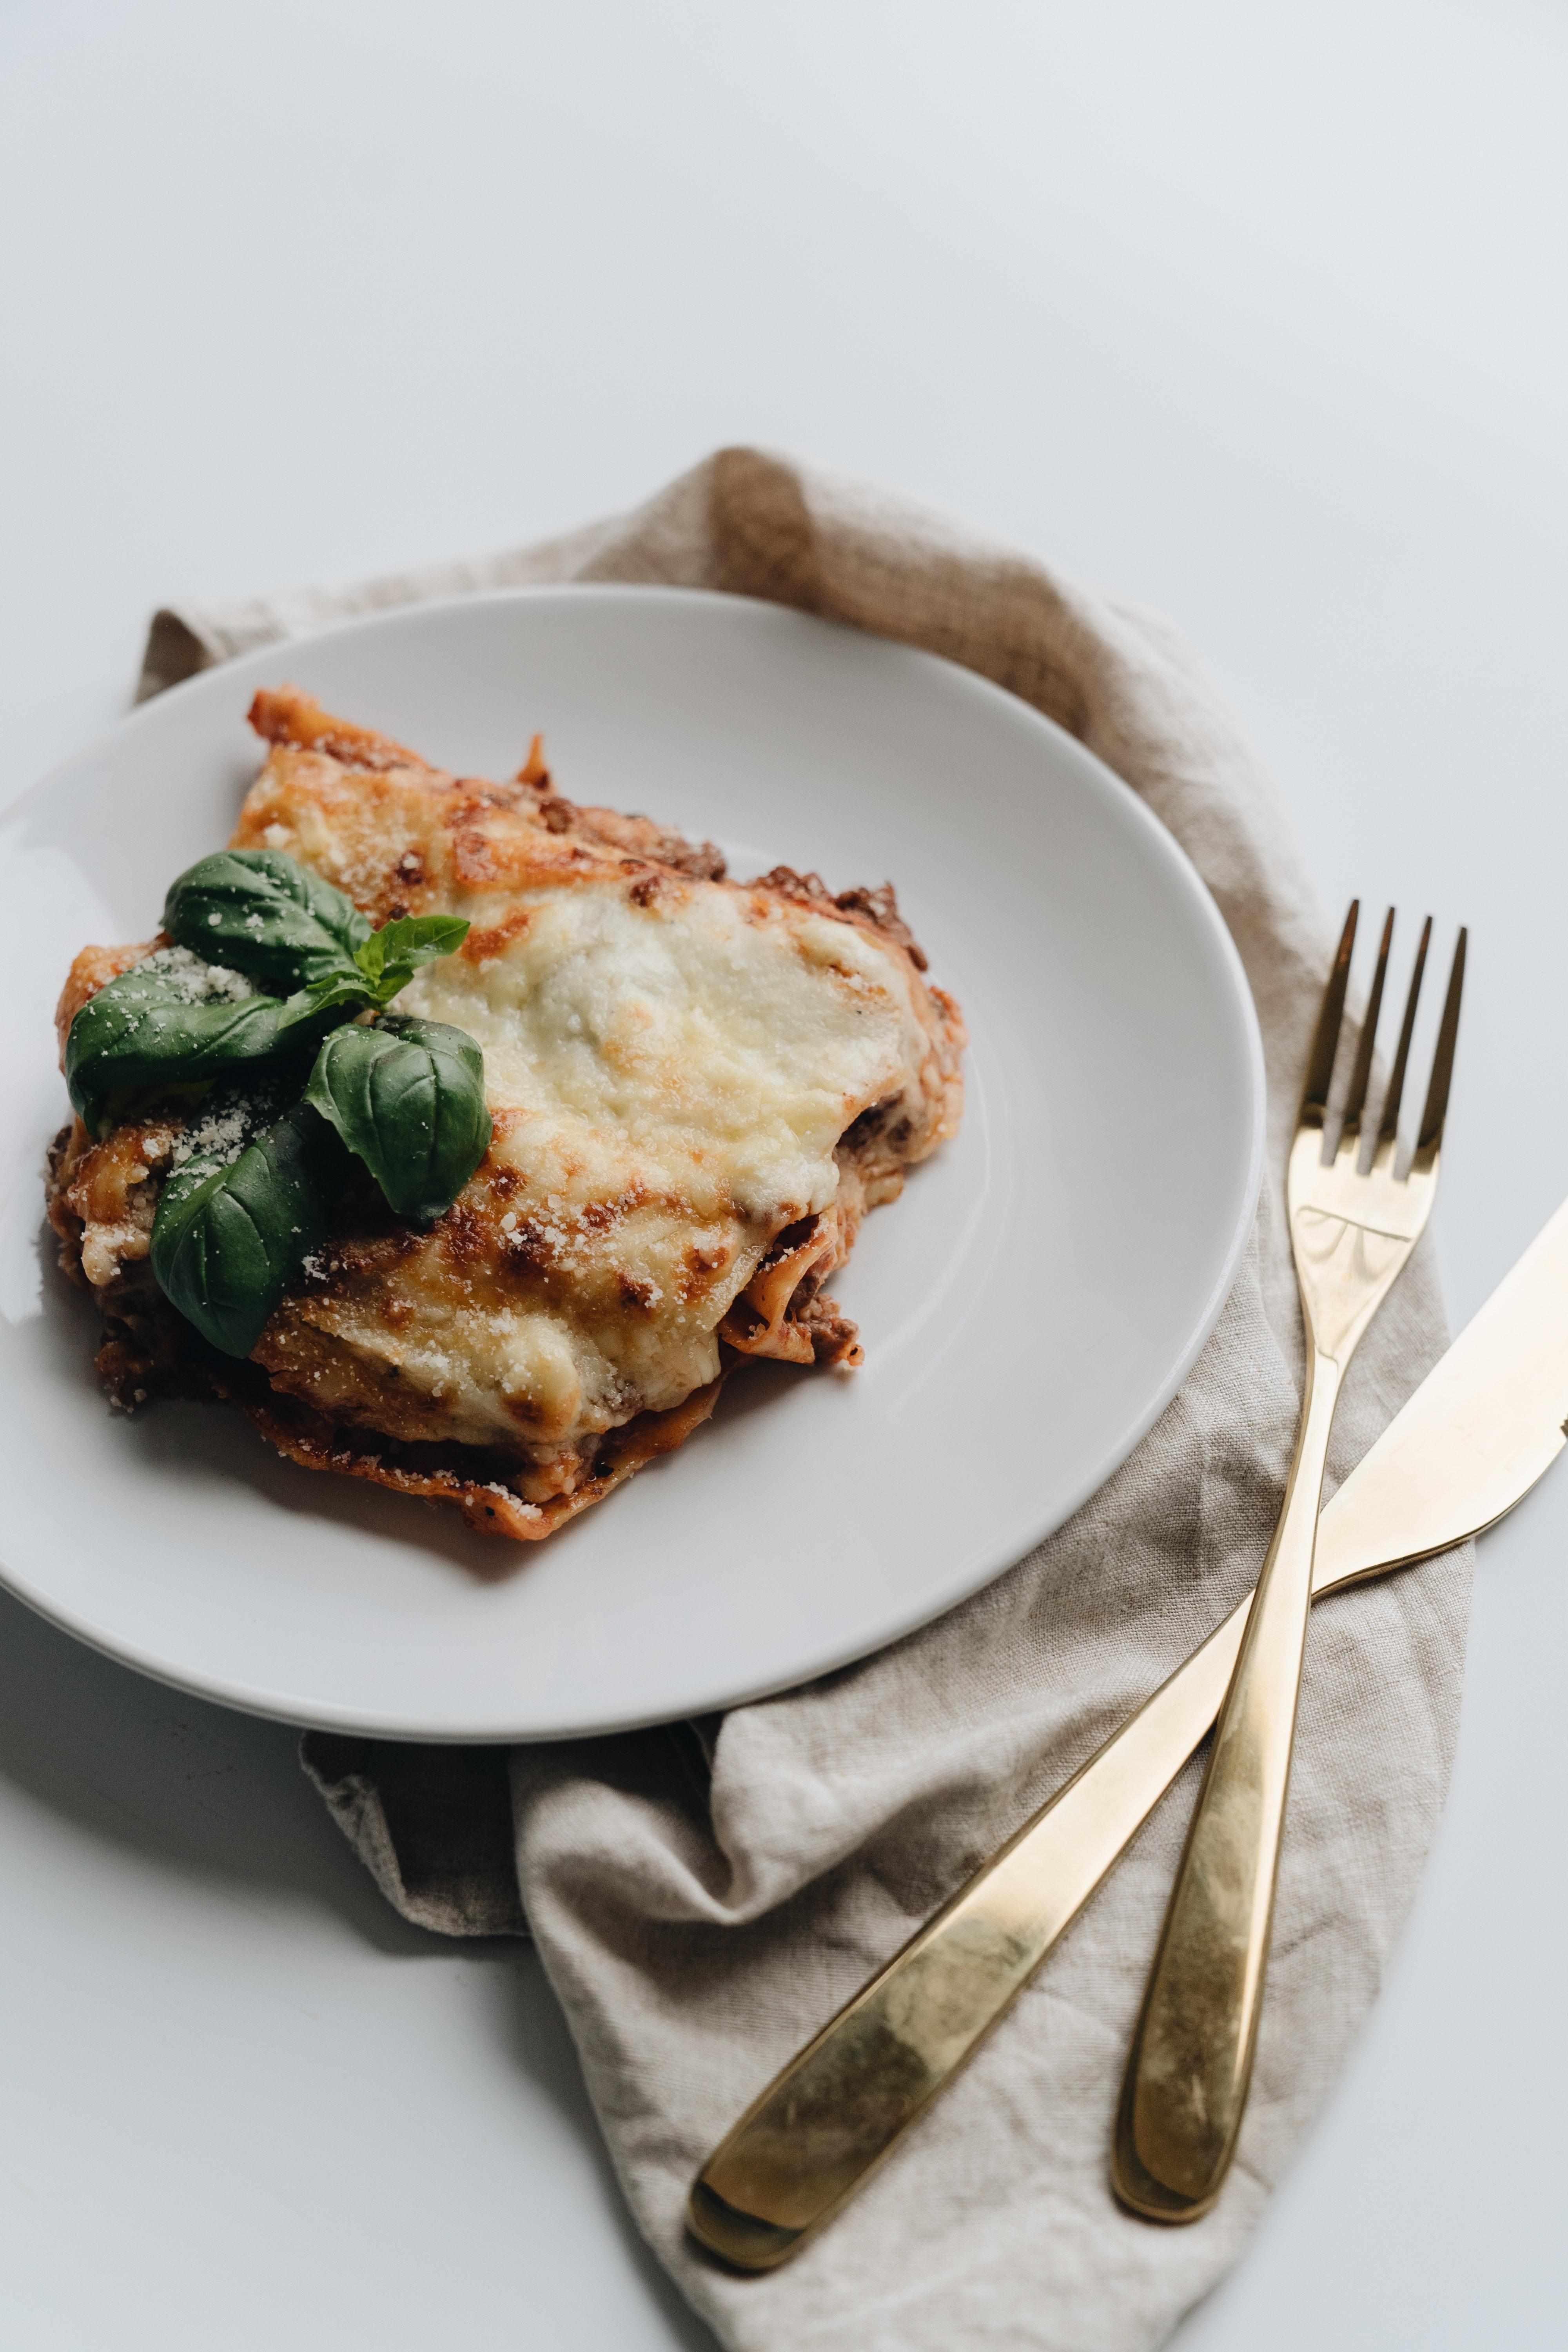 How long can lasagna sit out after baking? 